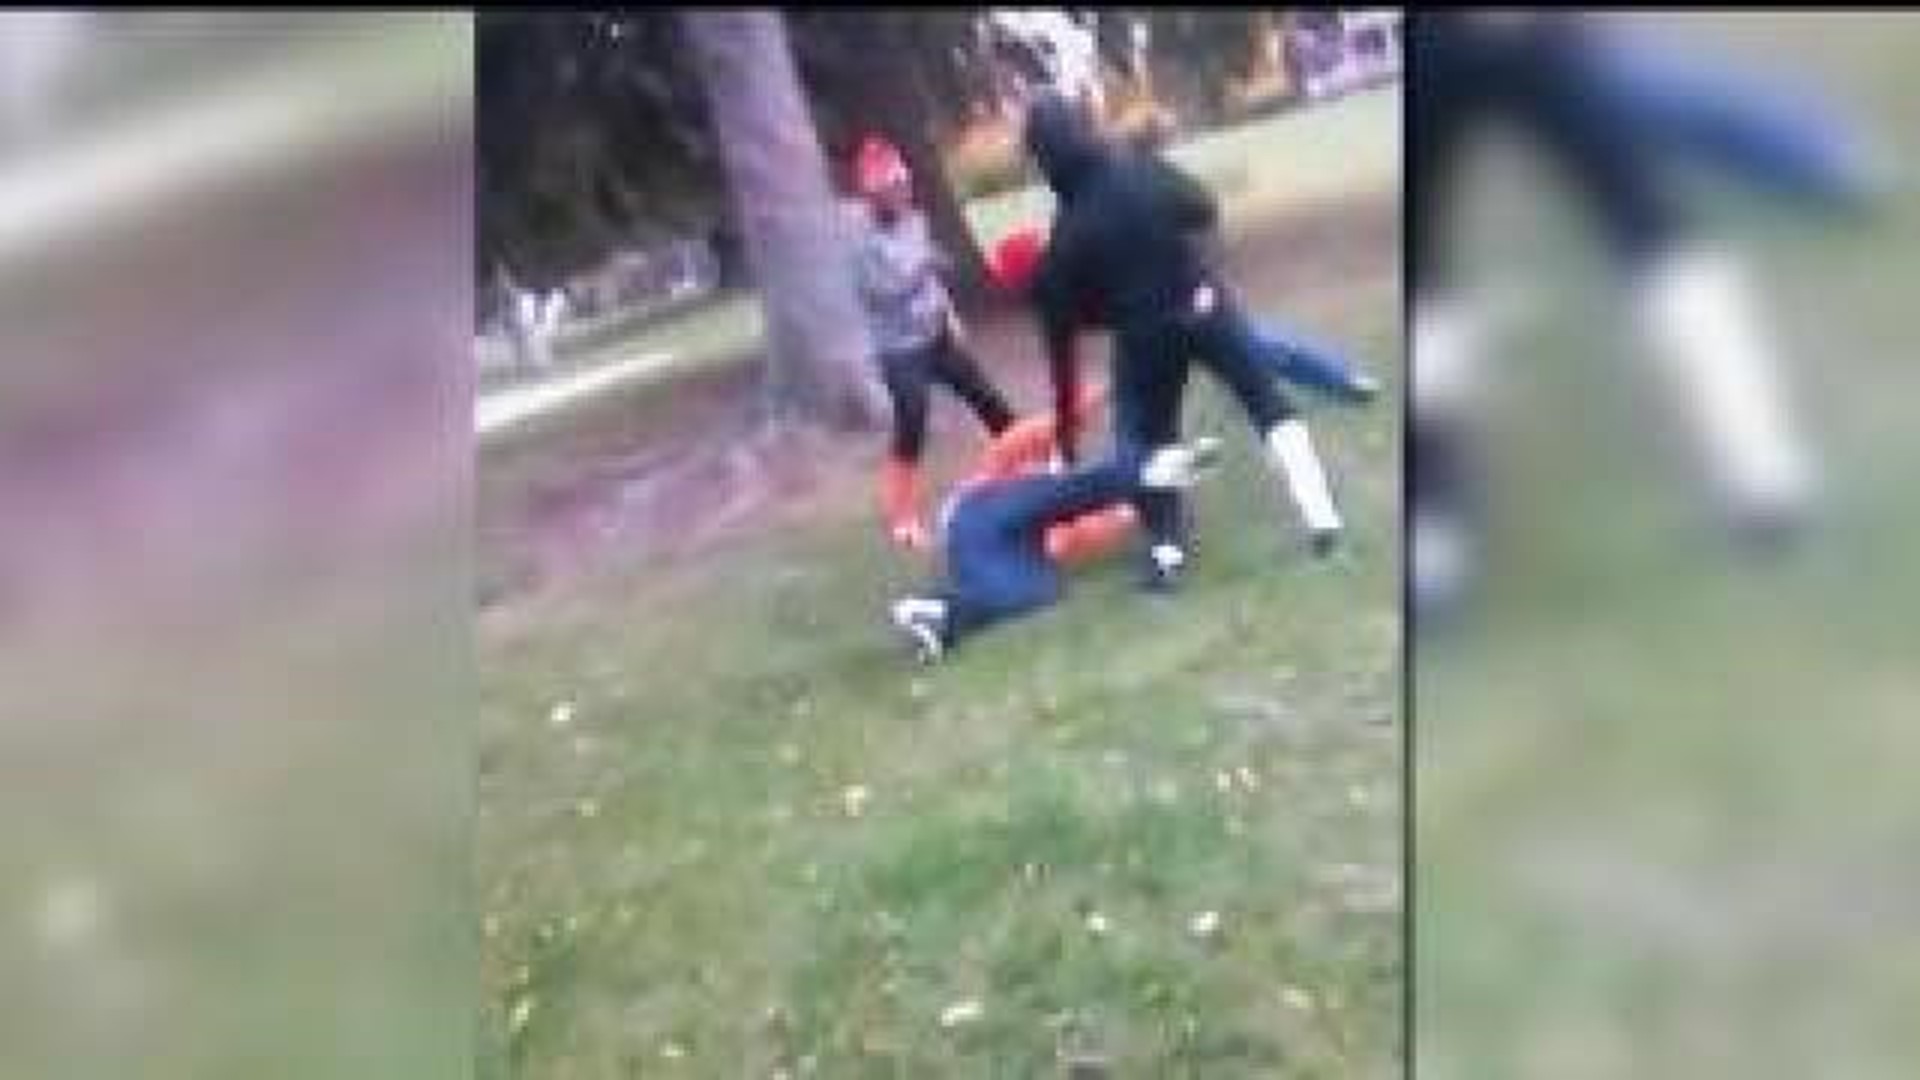 Bullying incident in Burlington turned over to police